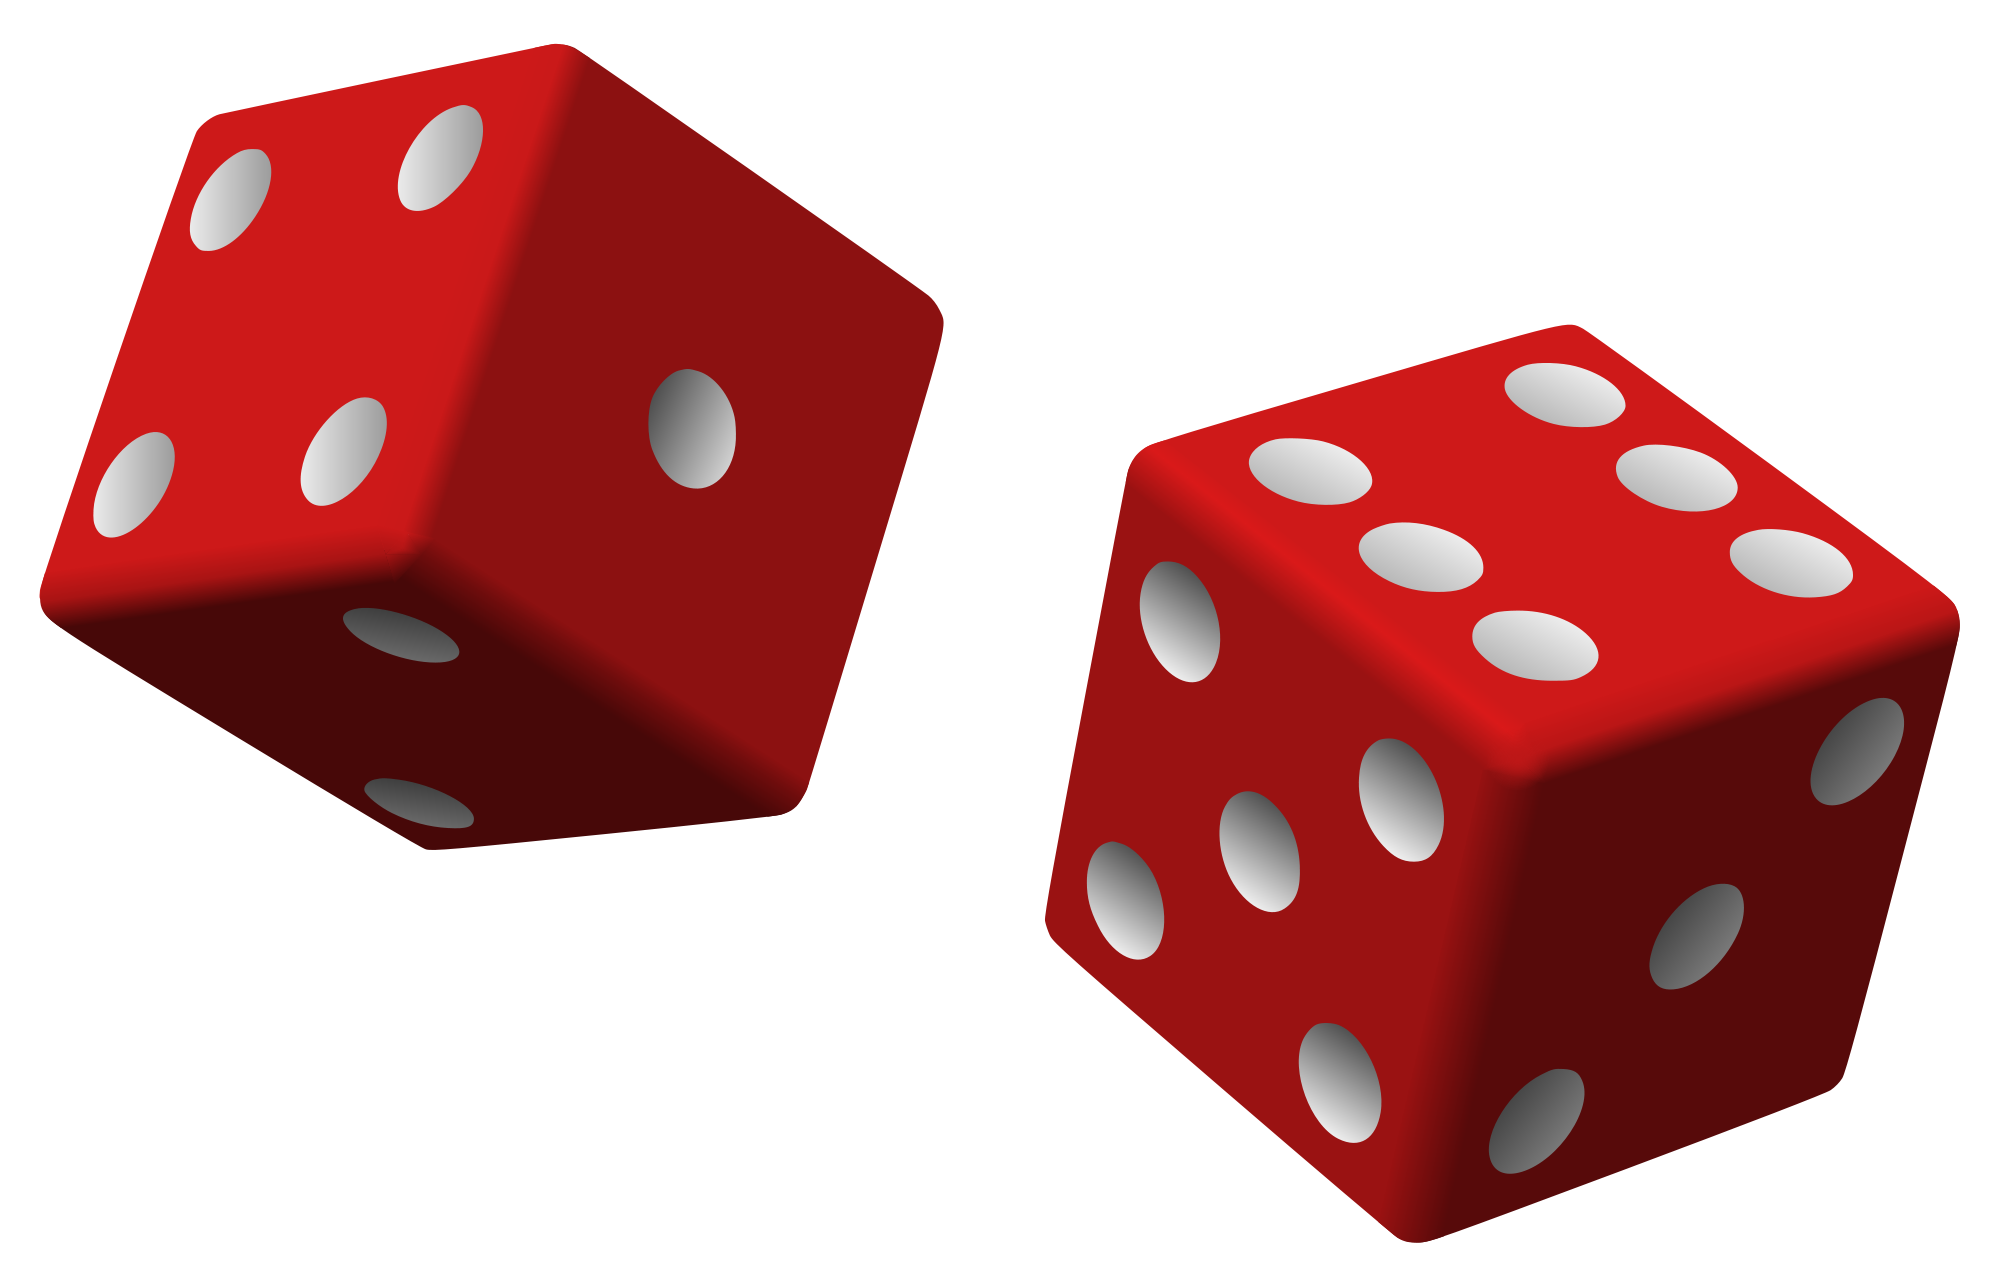 File:Two red dice 01.svg